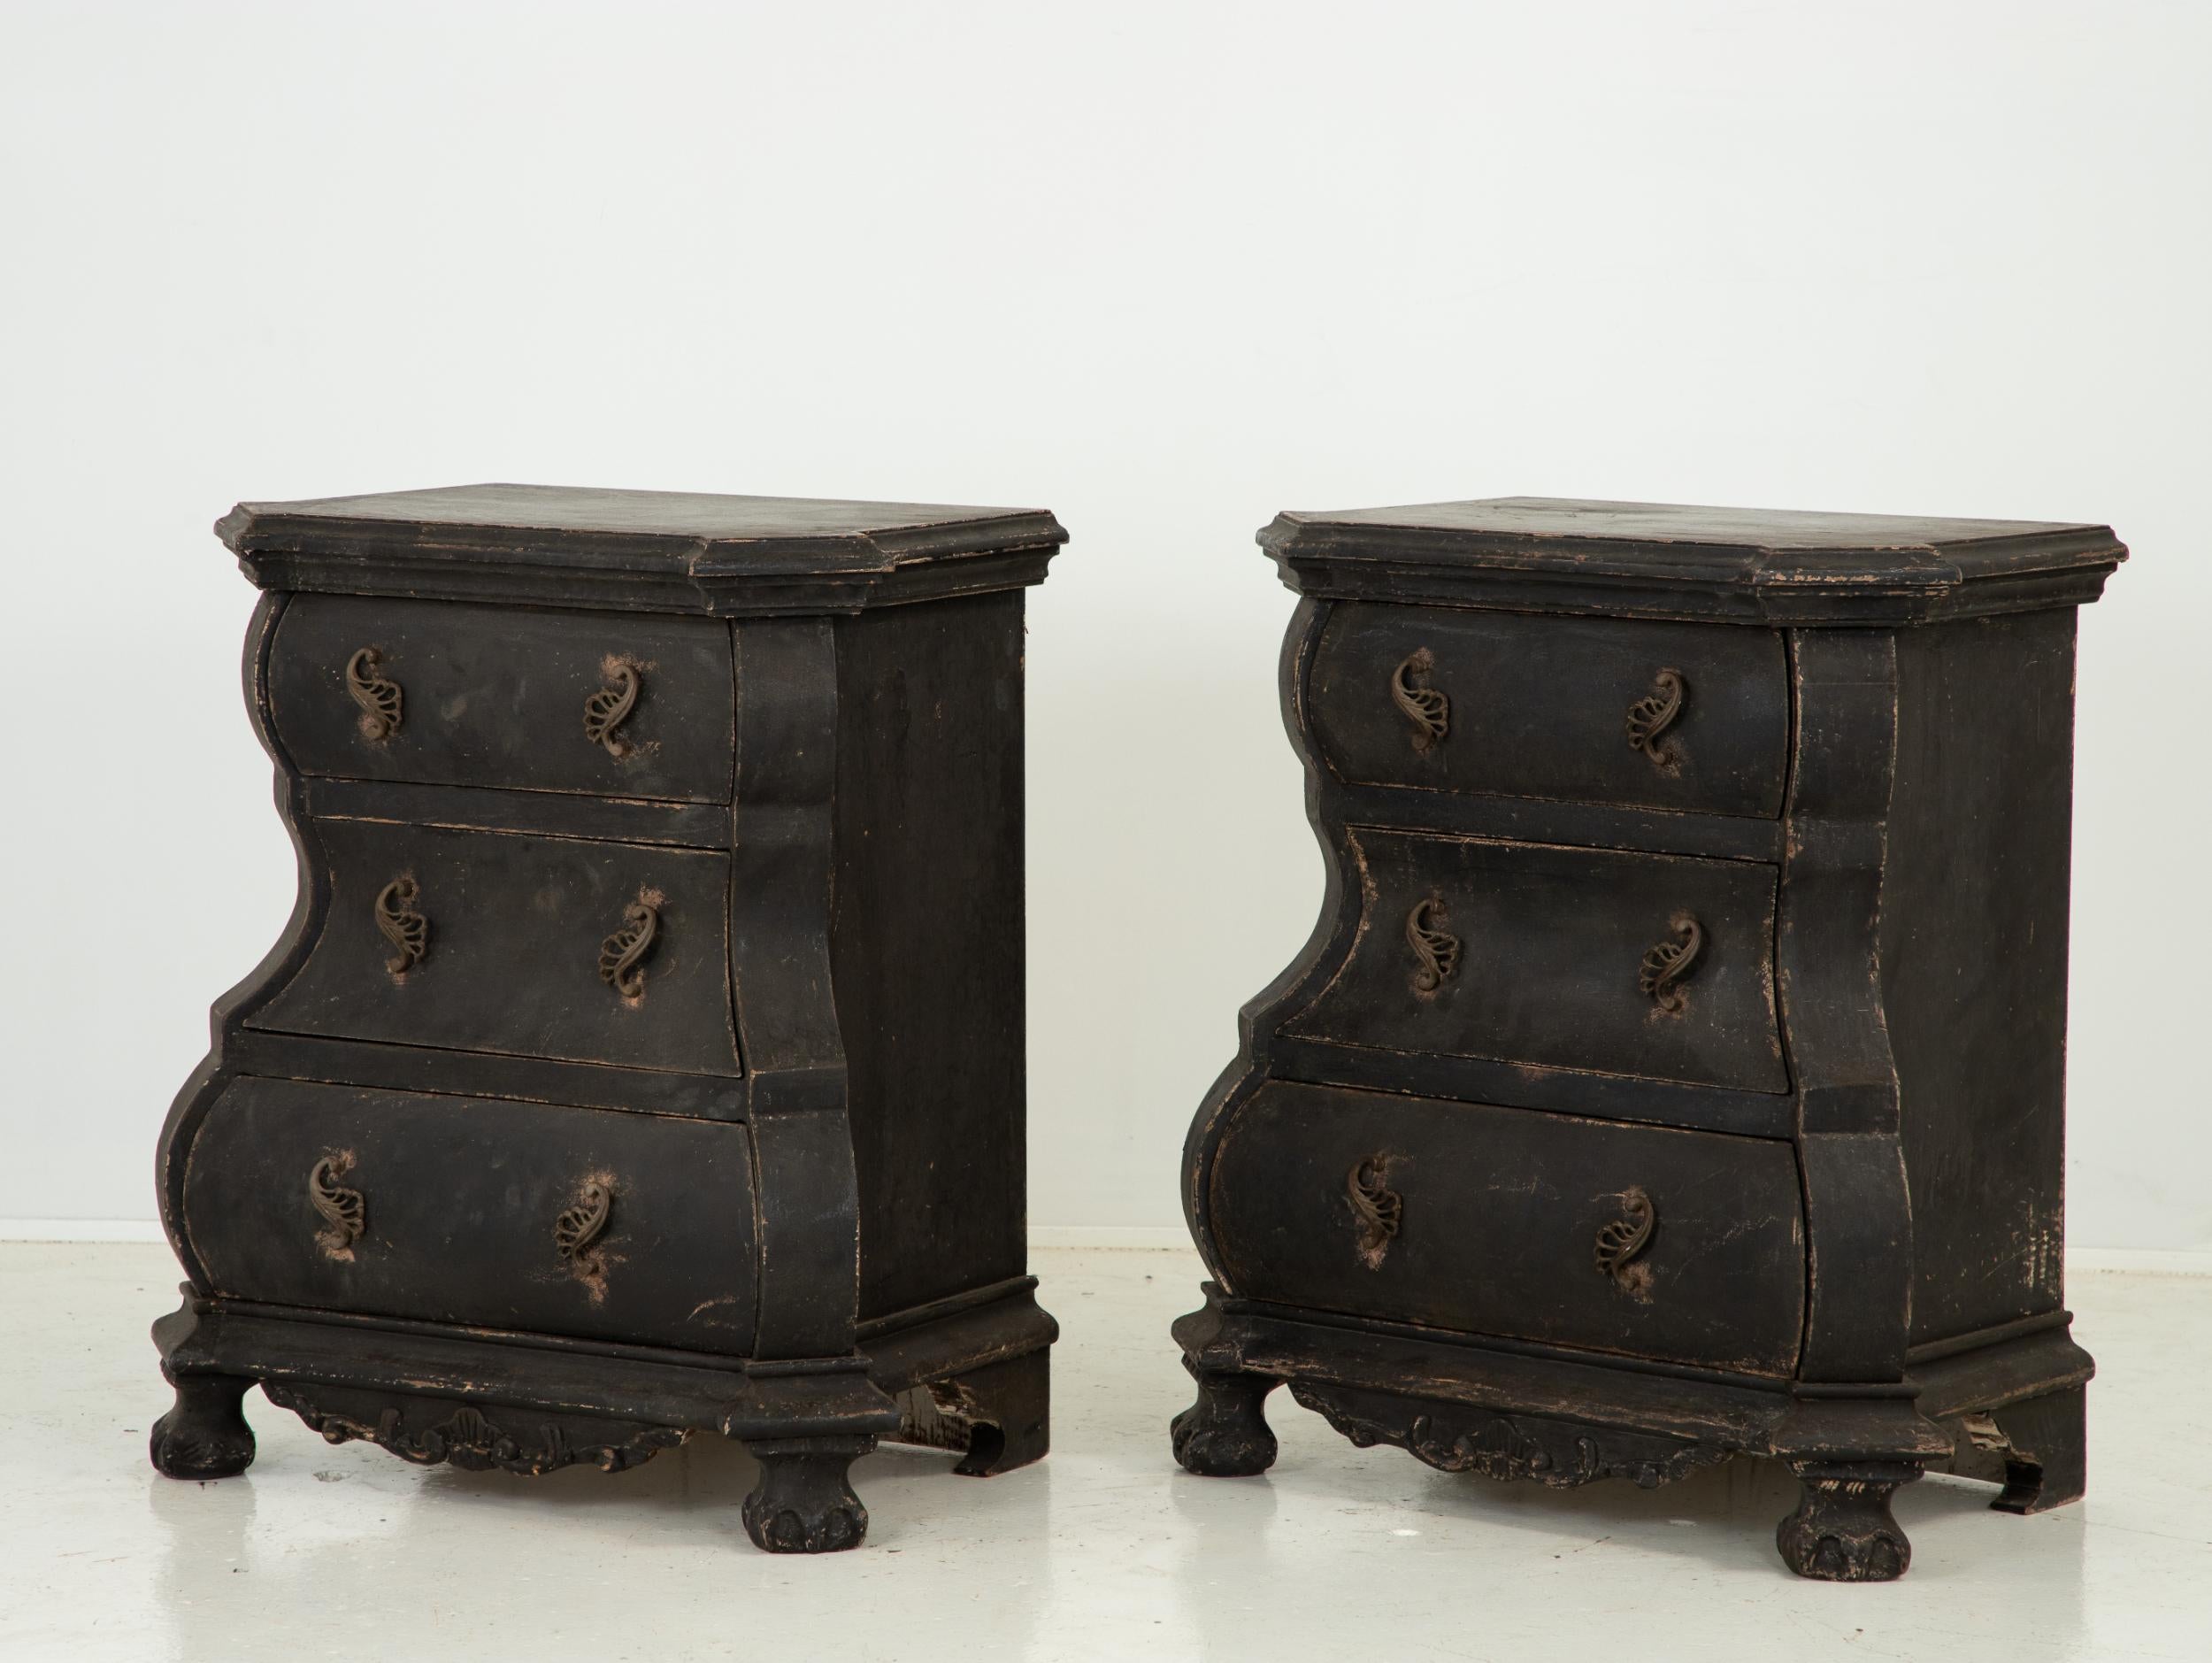 Stunning antique late 19th century pair of Dutch bombes or dressers made in the Netherlands in the late 19th century. Sinuous serpentine silhouette painted in a rich black. Carved scroll at the base is complemented by naive carved paw feet. Dressers